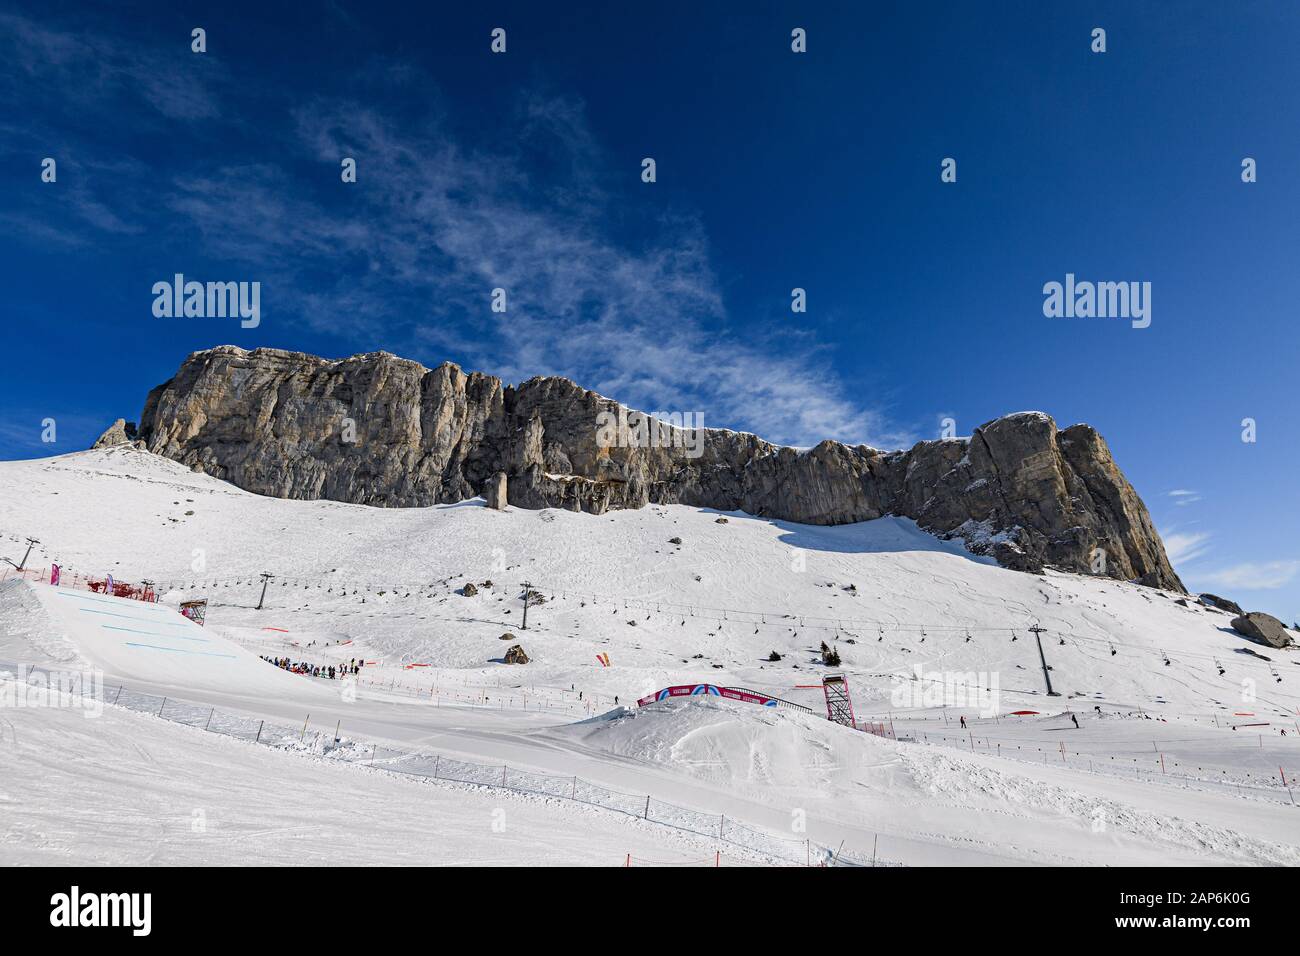 LAUSANNE, SWITZERLAND. 21th, Jan 2020. The overview of the Leysin Park & Pipe during the Men's Freeski Halfpipe competitions of the Lausanne 2020 Youth Olympic Games at Leysin Park & Pipe on Tuesday, 21 January 2020. LAUSANNE, SWITZERLAND. Credit: Taka G Wu/Alamy Live News Stock Photo